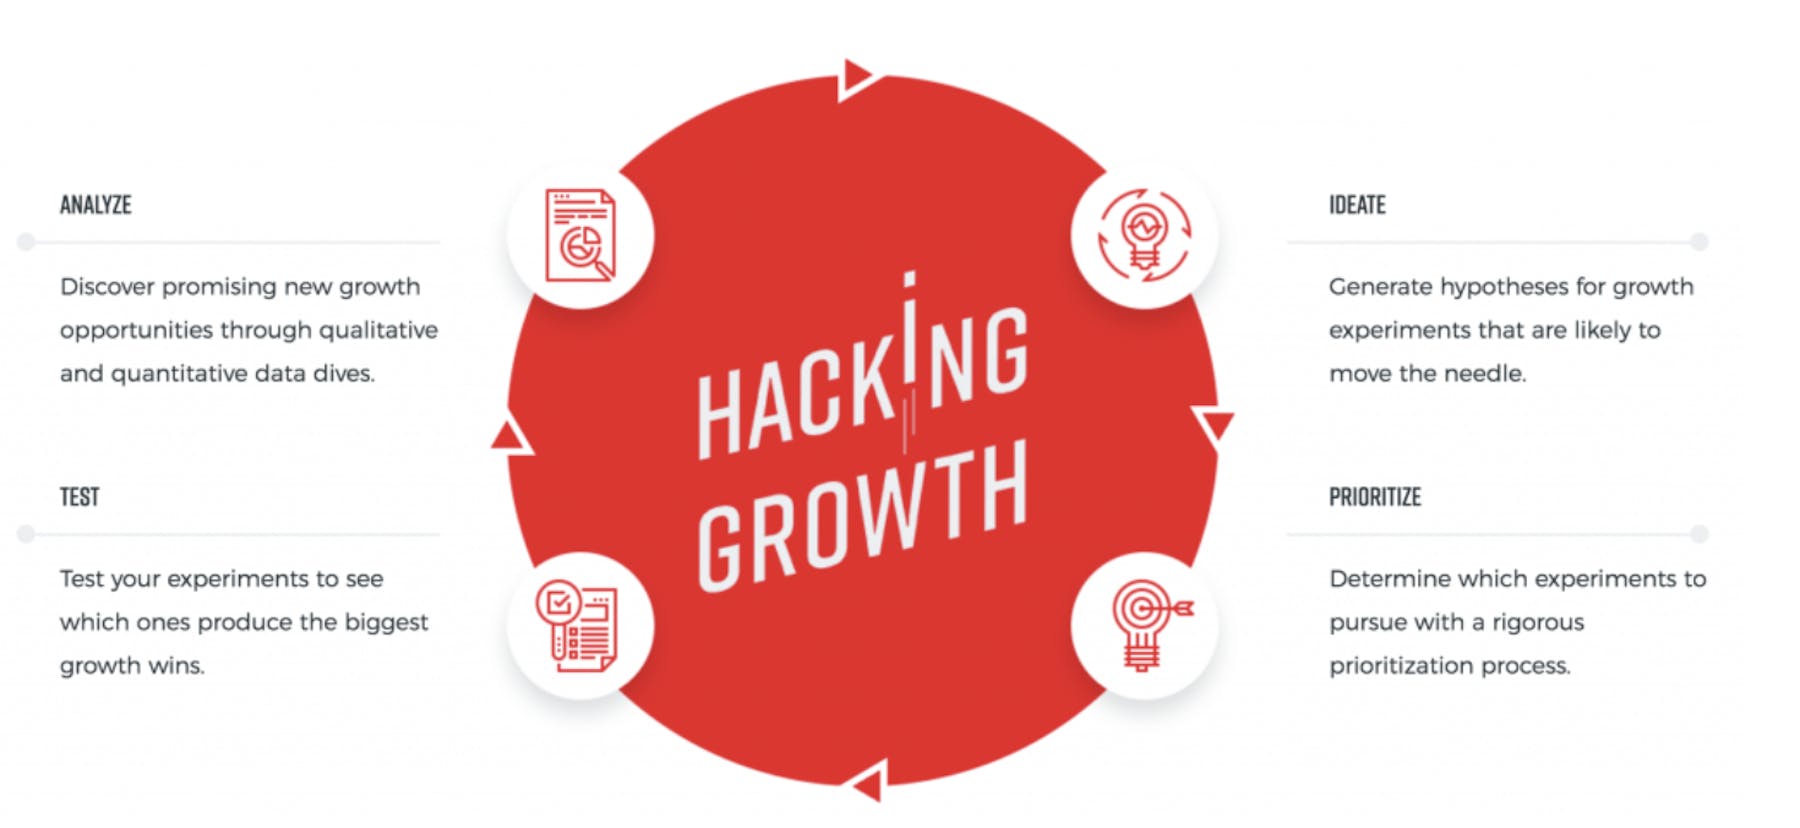 The day-to-day methods of UX and growth hacking are very similar. UX designers will see some similarities in the growth hacking cycle - the process of hacking - as outlined by Sean Ellis. 